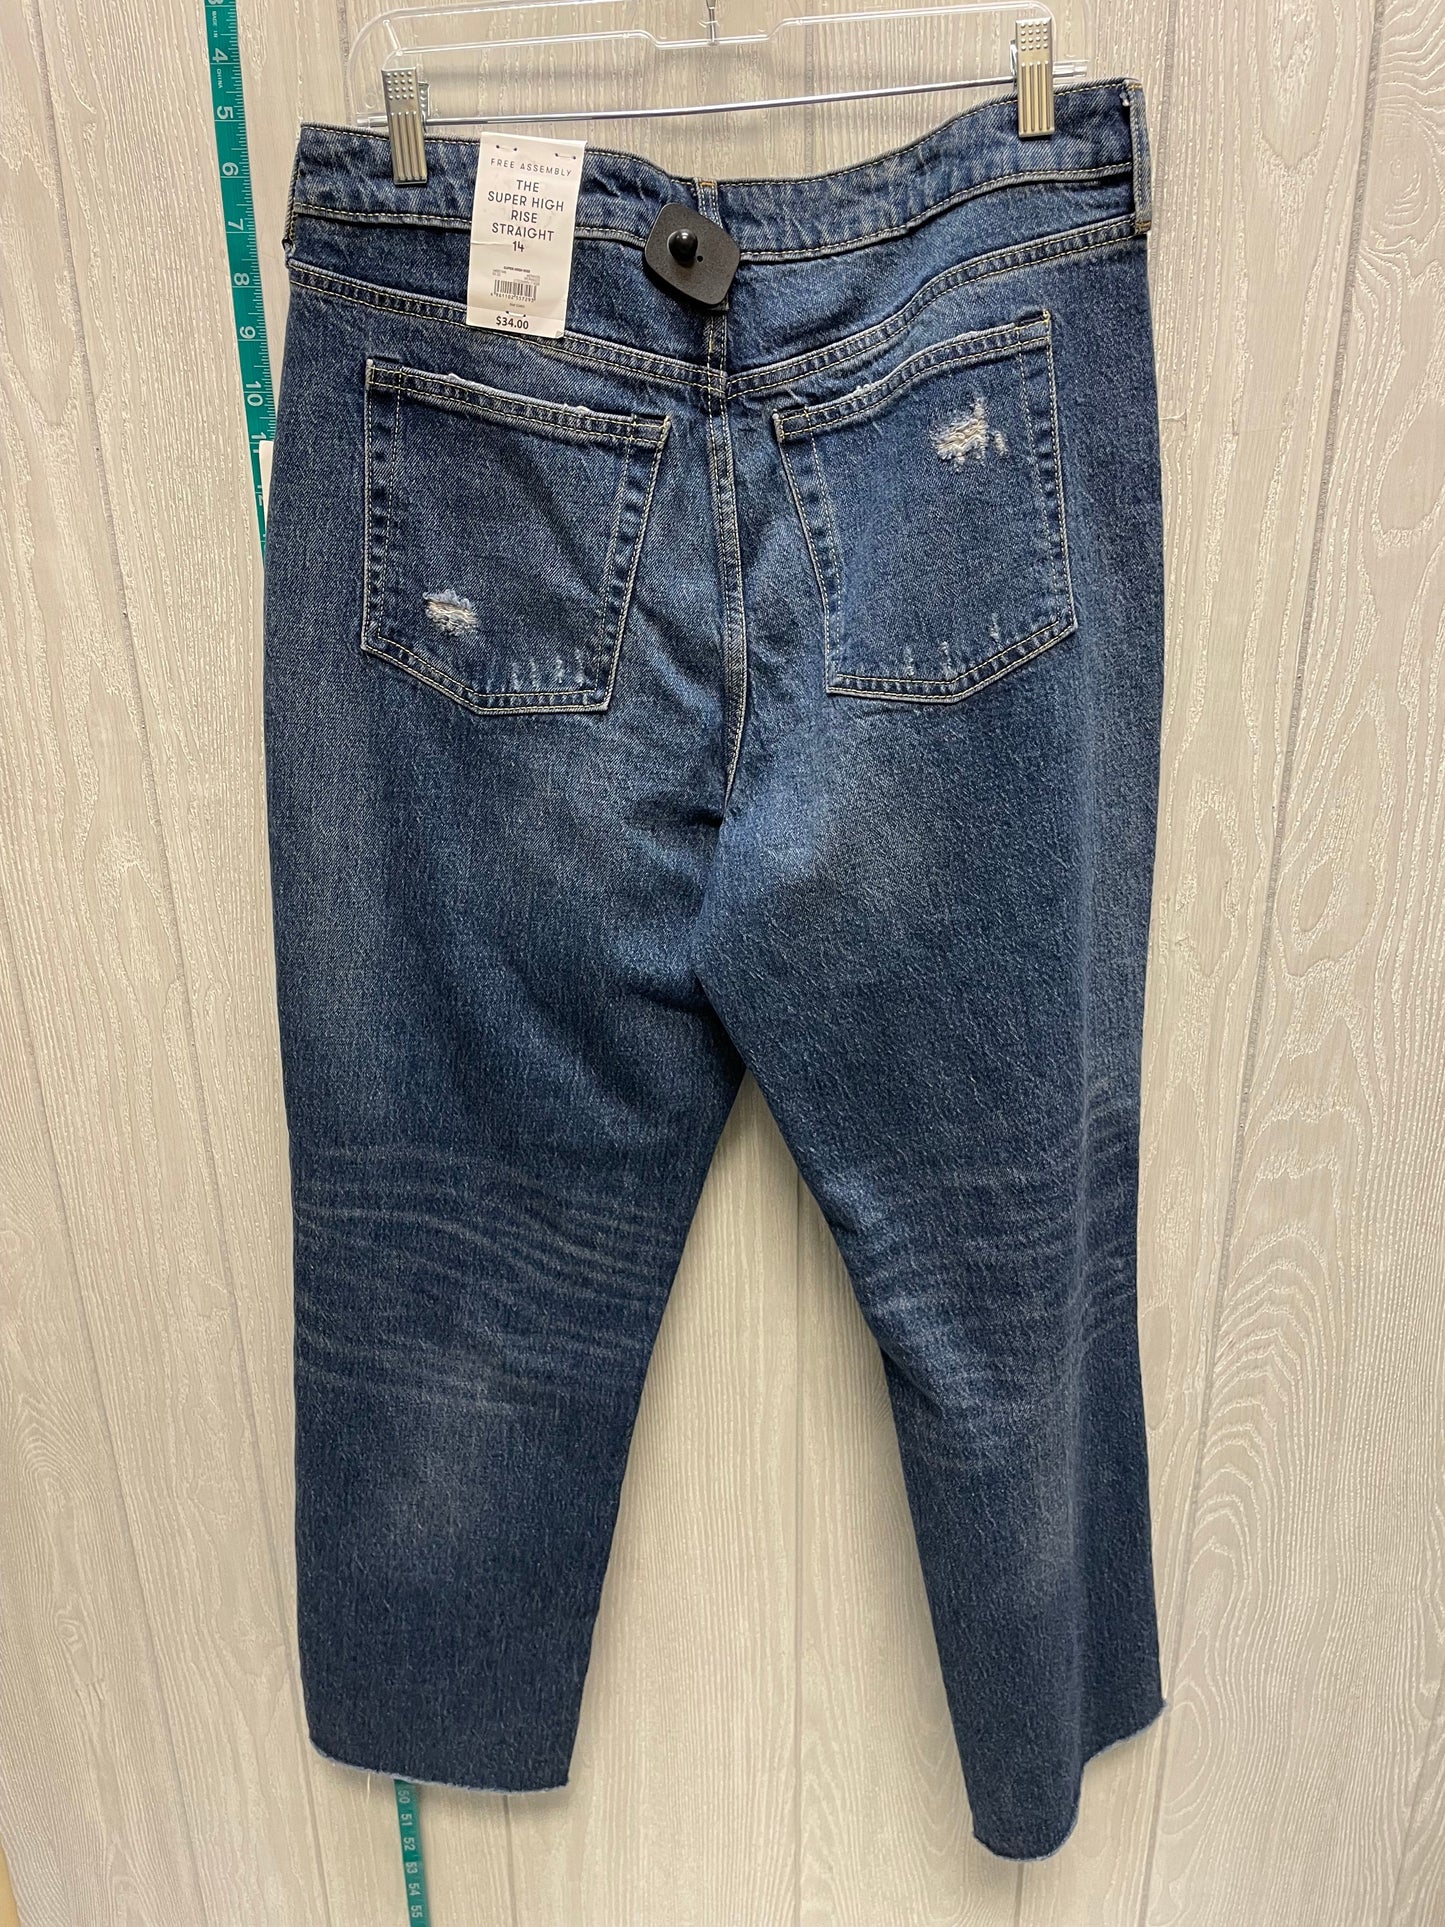 Blue Denim Jeans Straight Free Assembly, Size 14